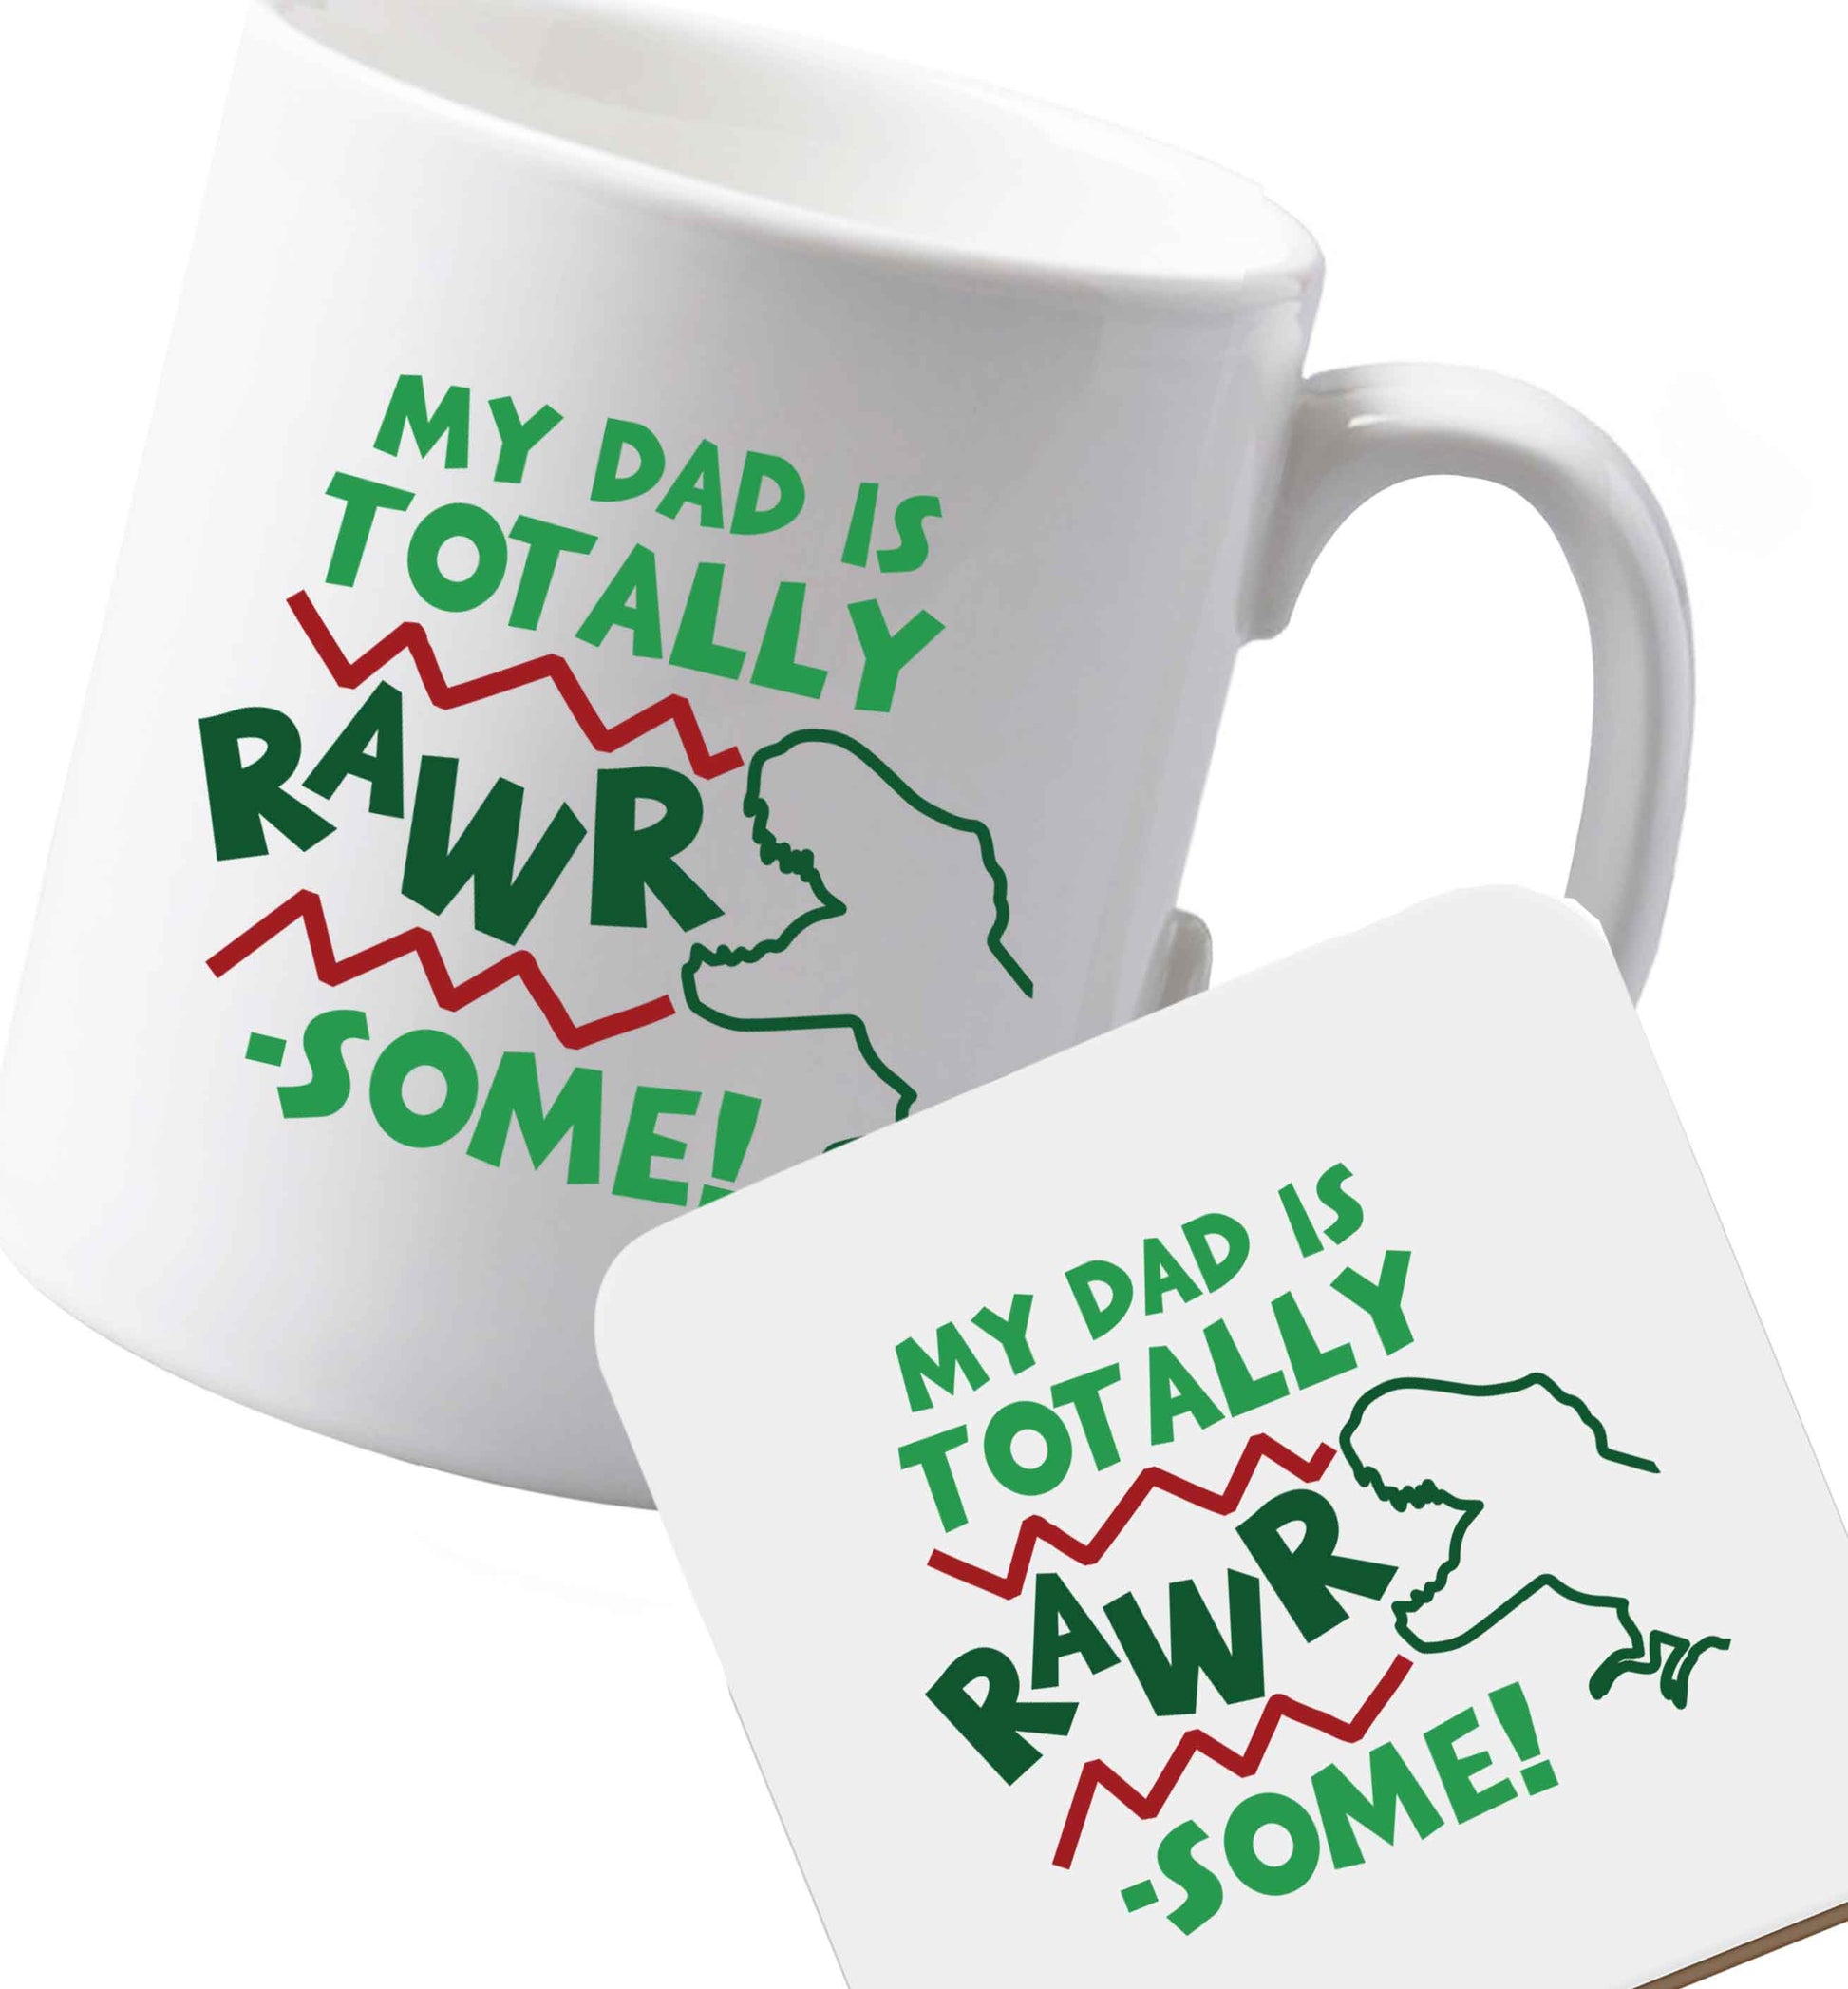 10 oz Ceramic mug and coaster My dad is totally rawrsome both sides